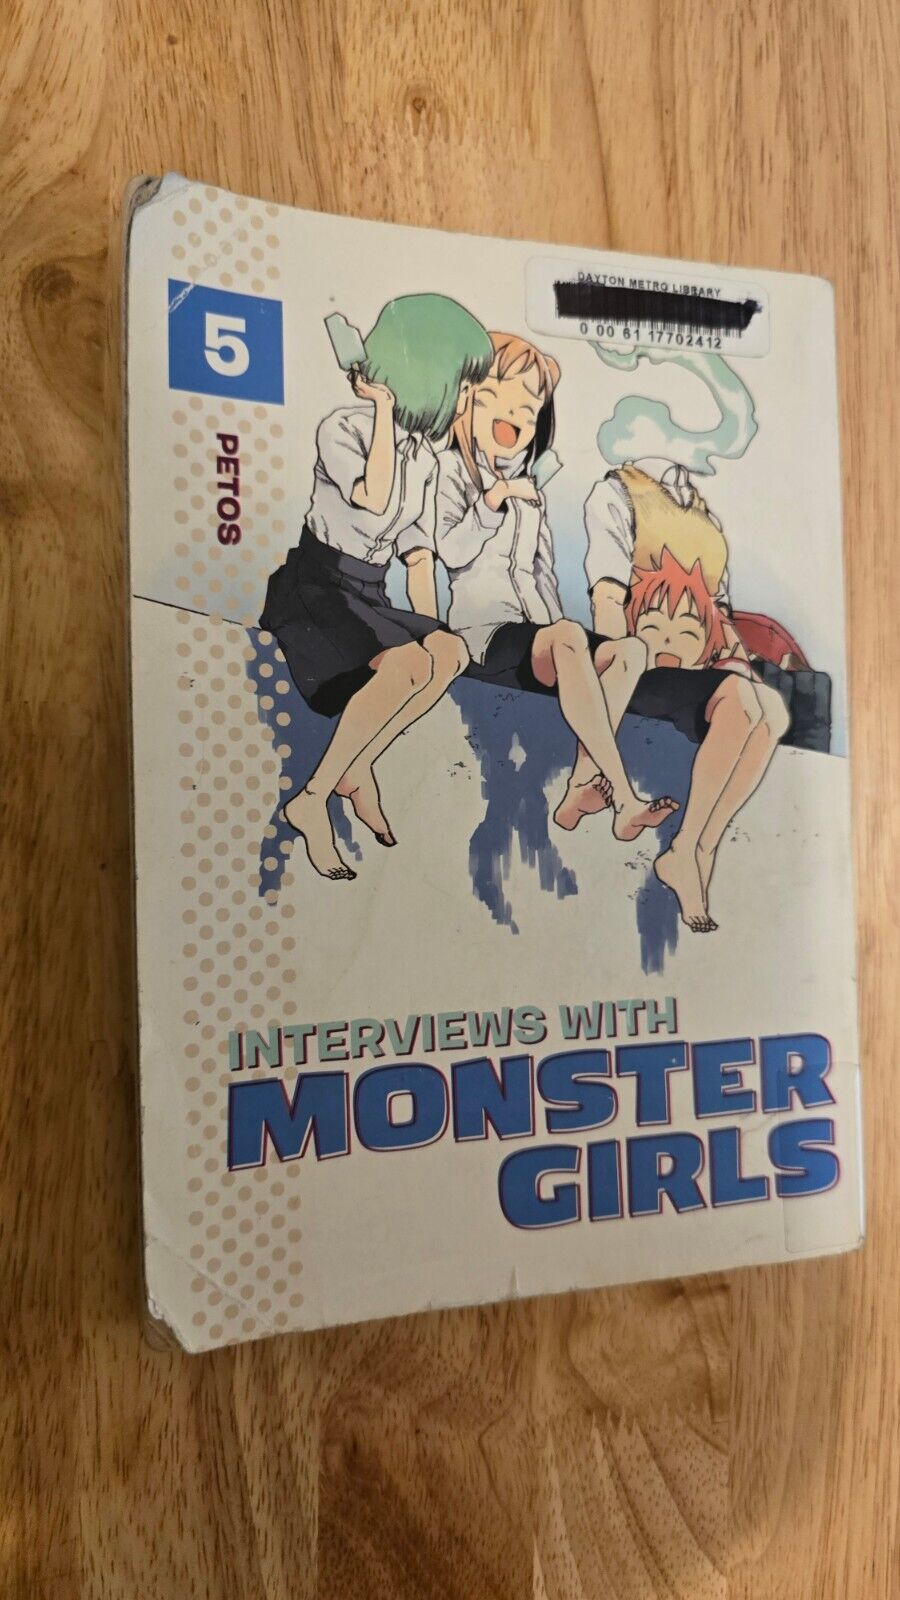 Interviews with Monster Girls, Vol. 5, by Petos English Manga